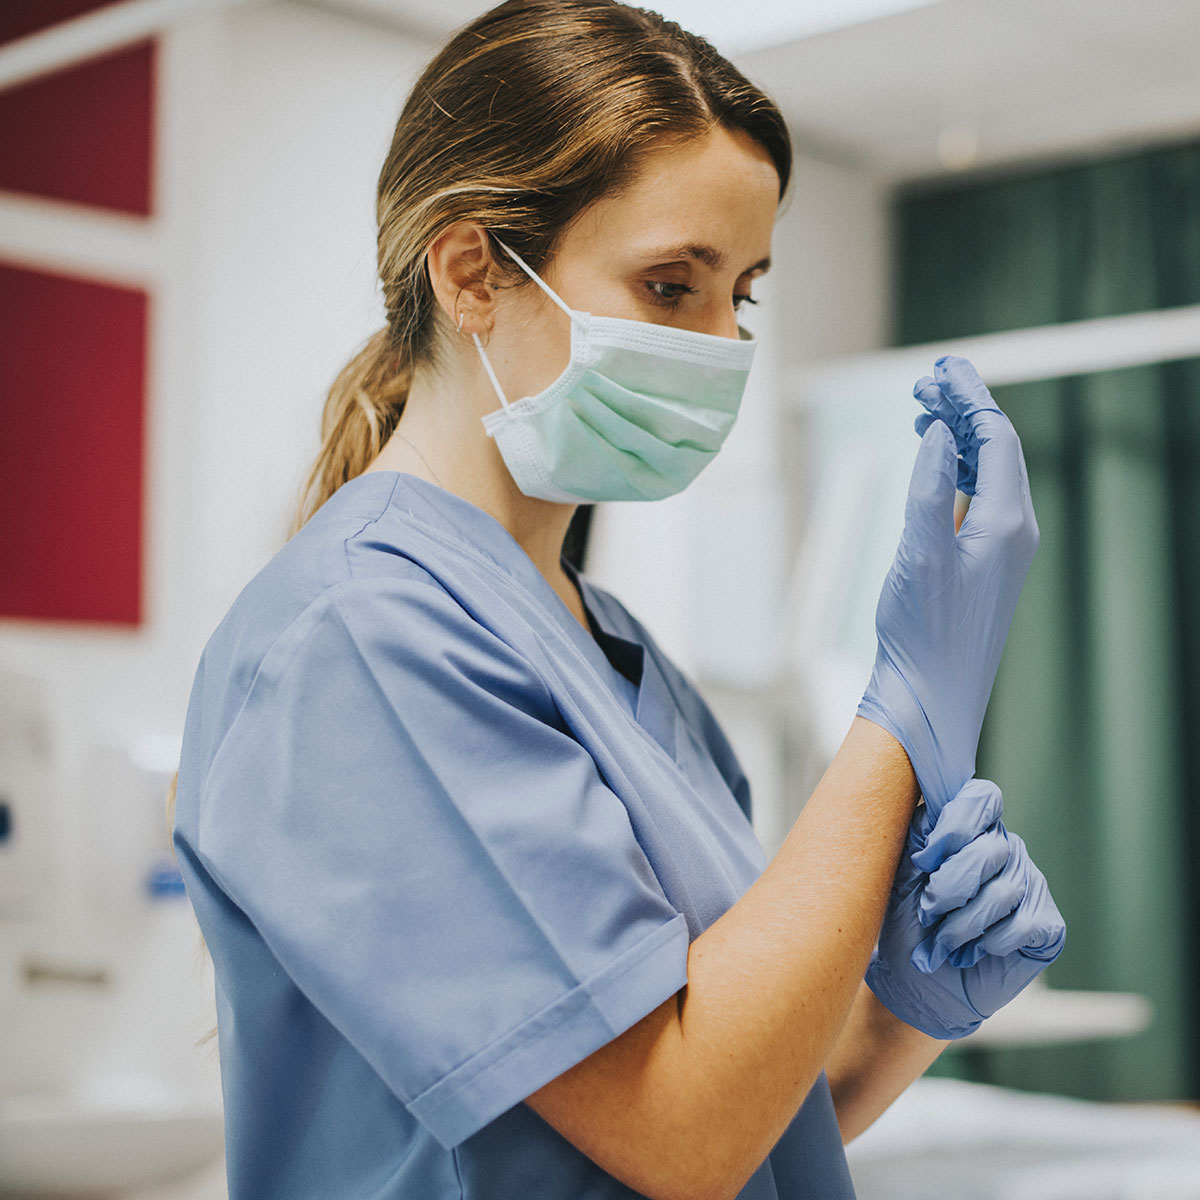 Medical worker in mask and scrubs puts on surgical gloves.